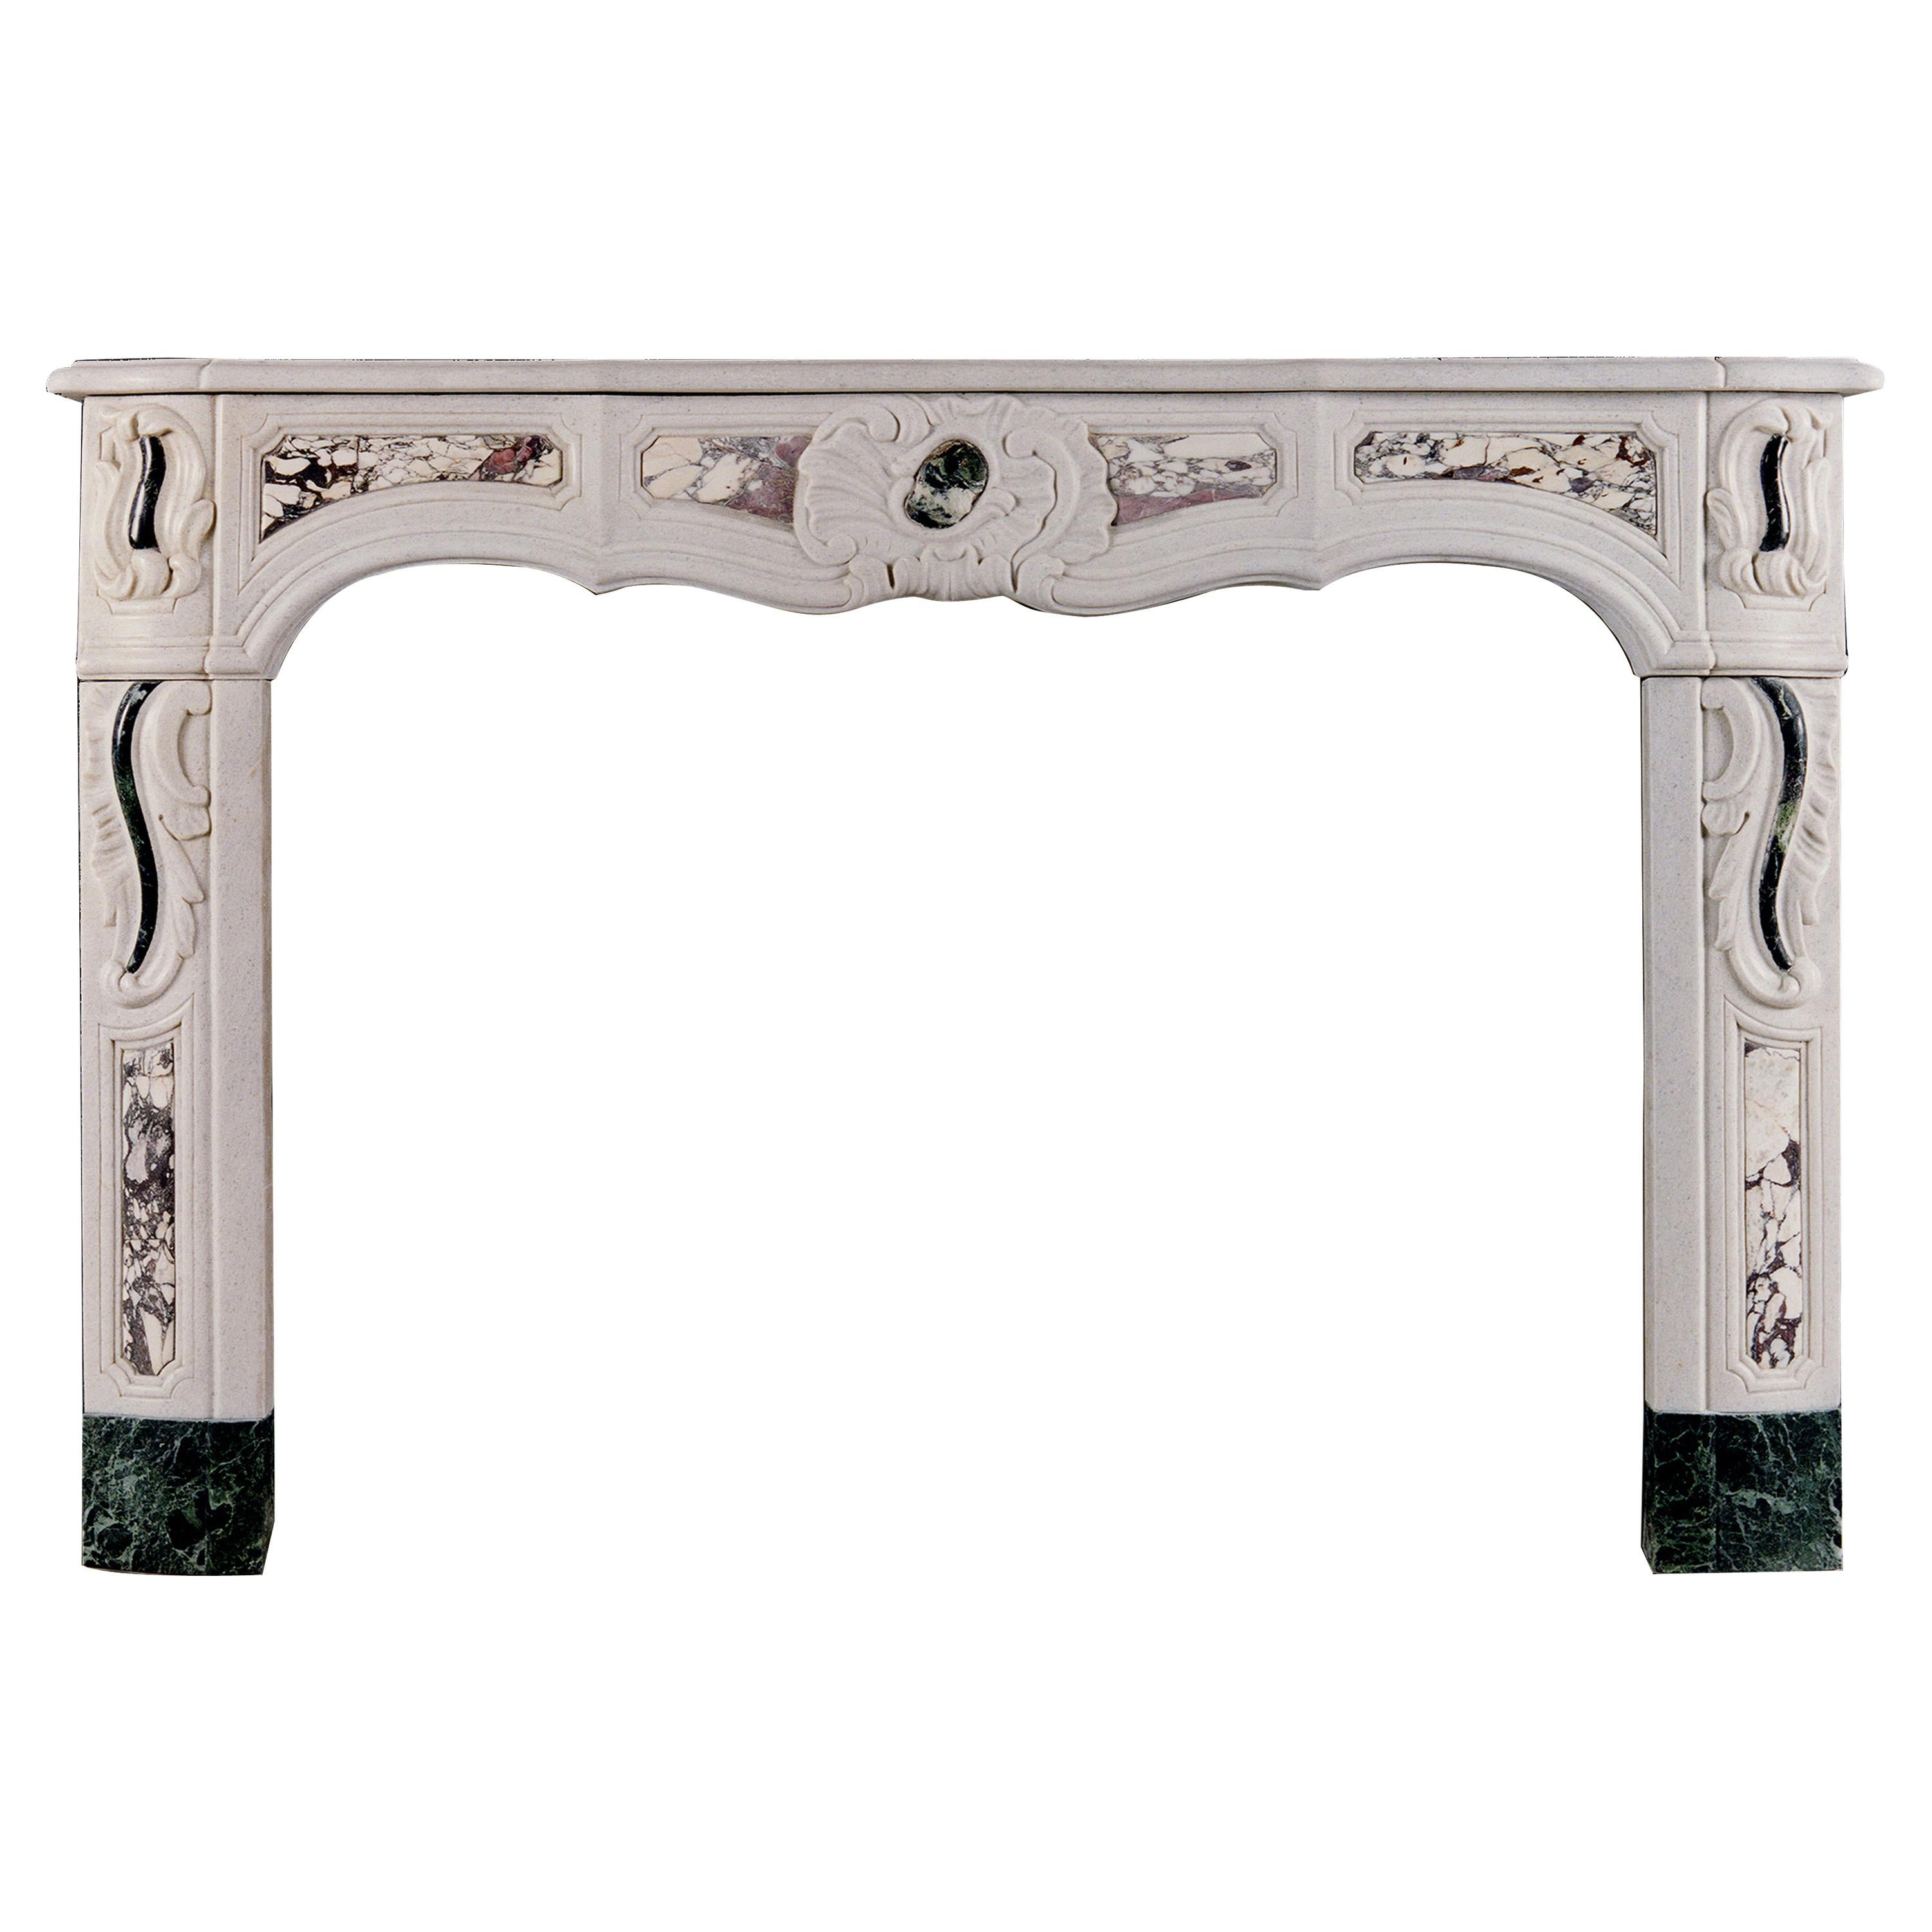 An Early 19th Century French Provençale White Marble Fireplace